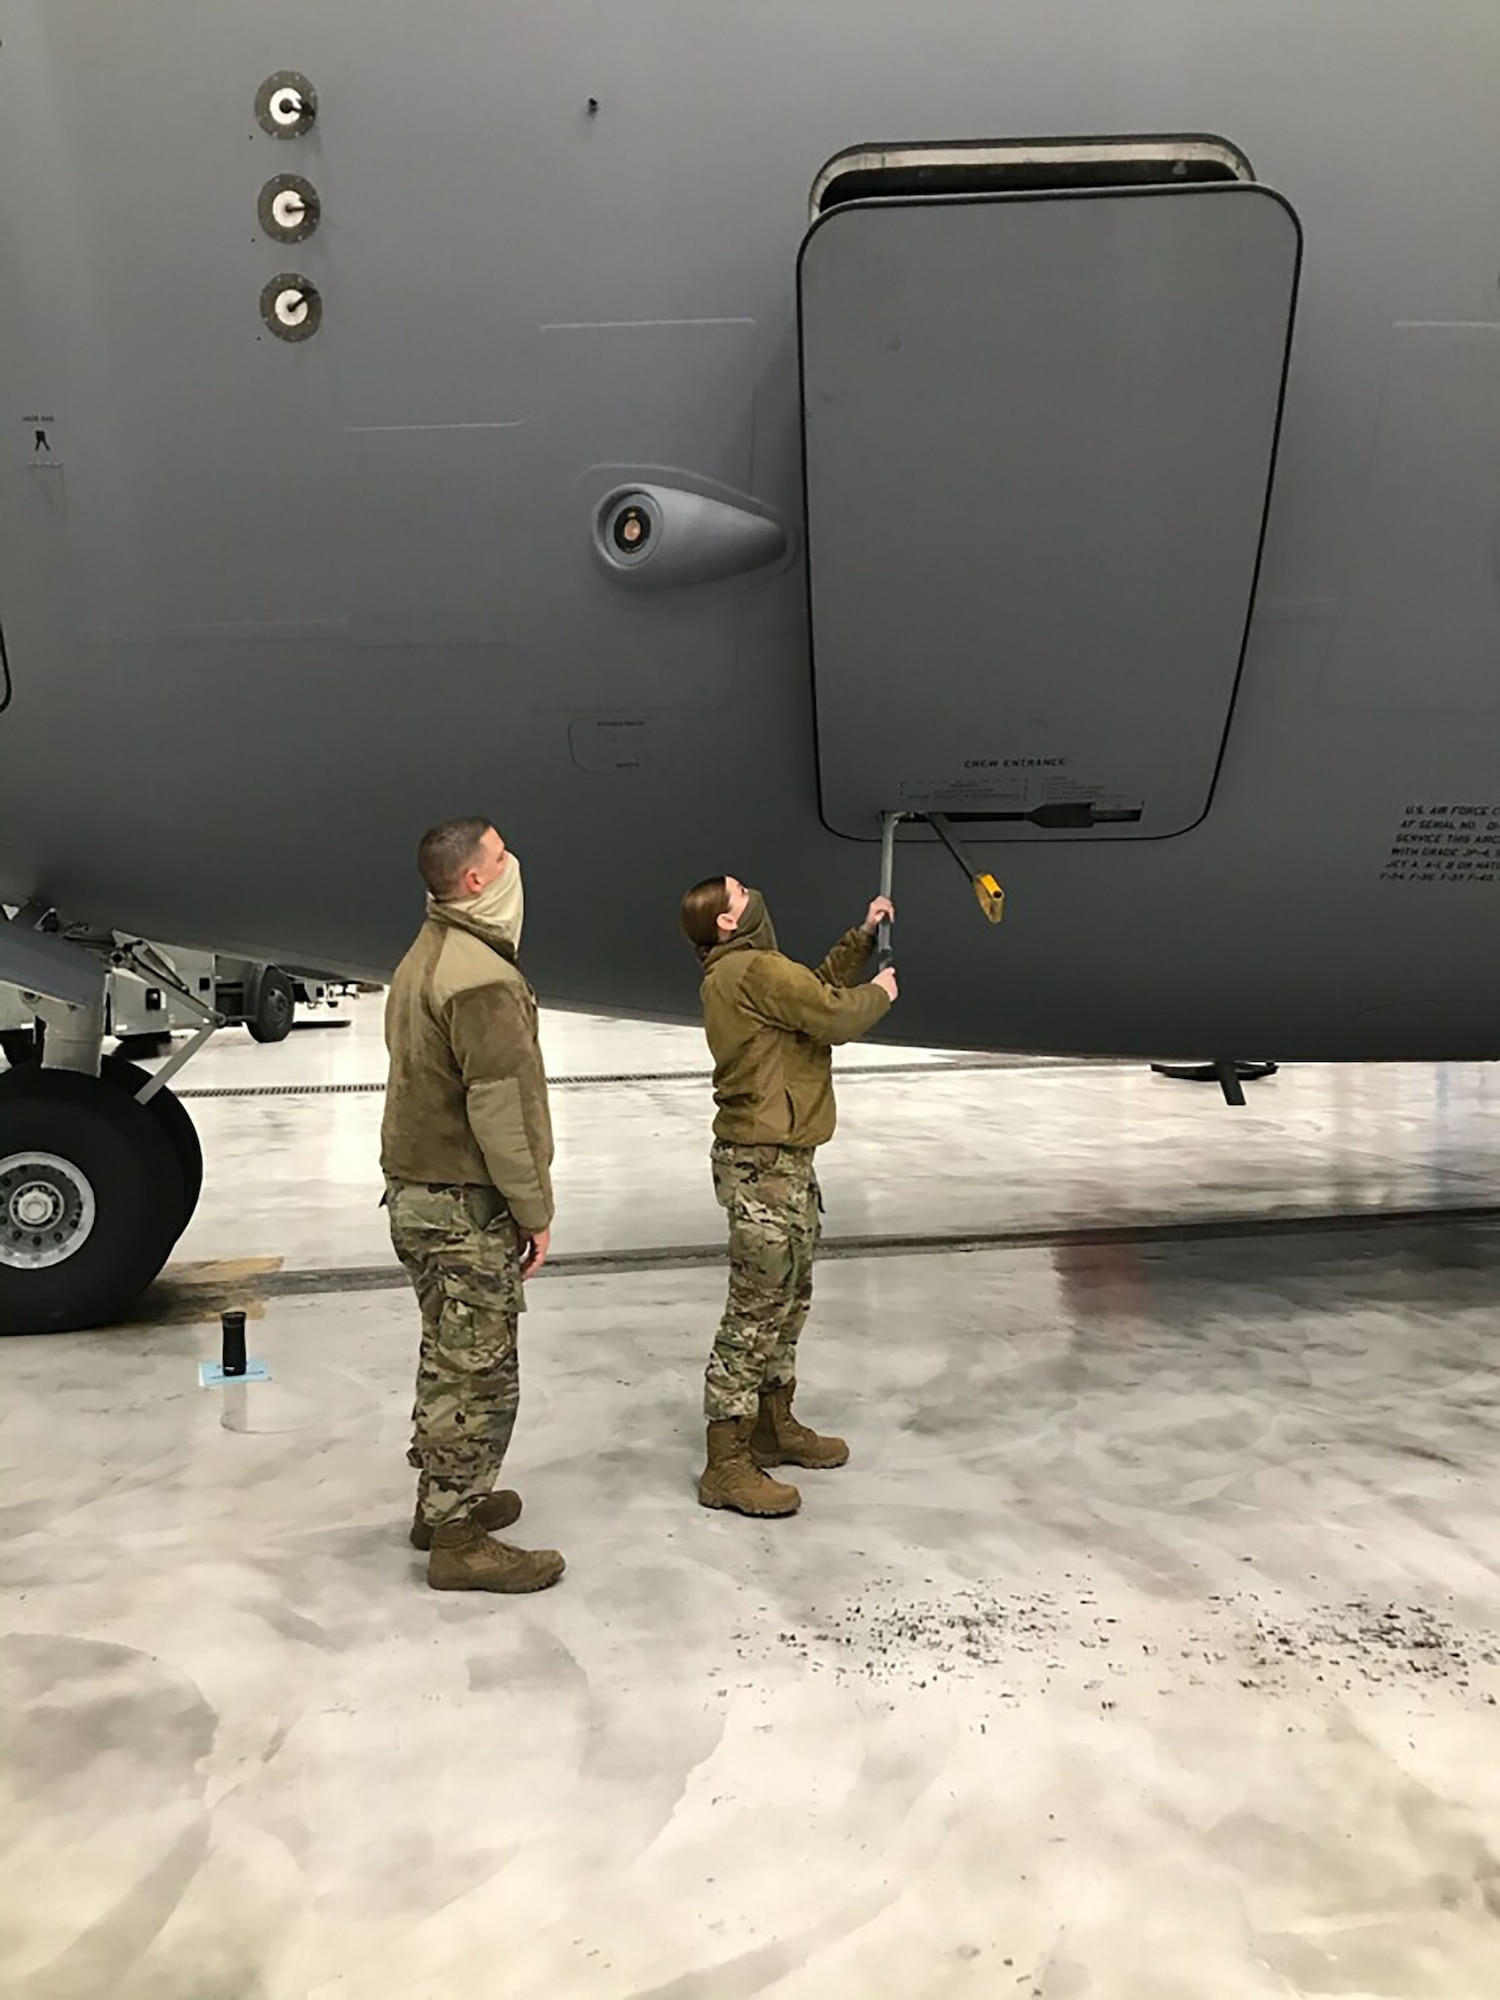 New kid on the block
445th Aircraft Maintenance Squadron Reserve Citizen Airmen Tech. Sgt. Jeremie Jamito trains new electrician, Amn. Jenna Gassawaysteere on opening and closing the doors of a C-17 Globemaster III aircraft Jan. 14, 2021.  Gassawaysteere was also taught hot to egress the jet in case of an emergency.